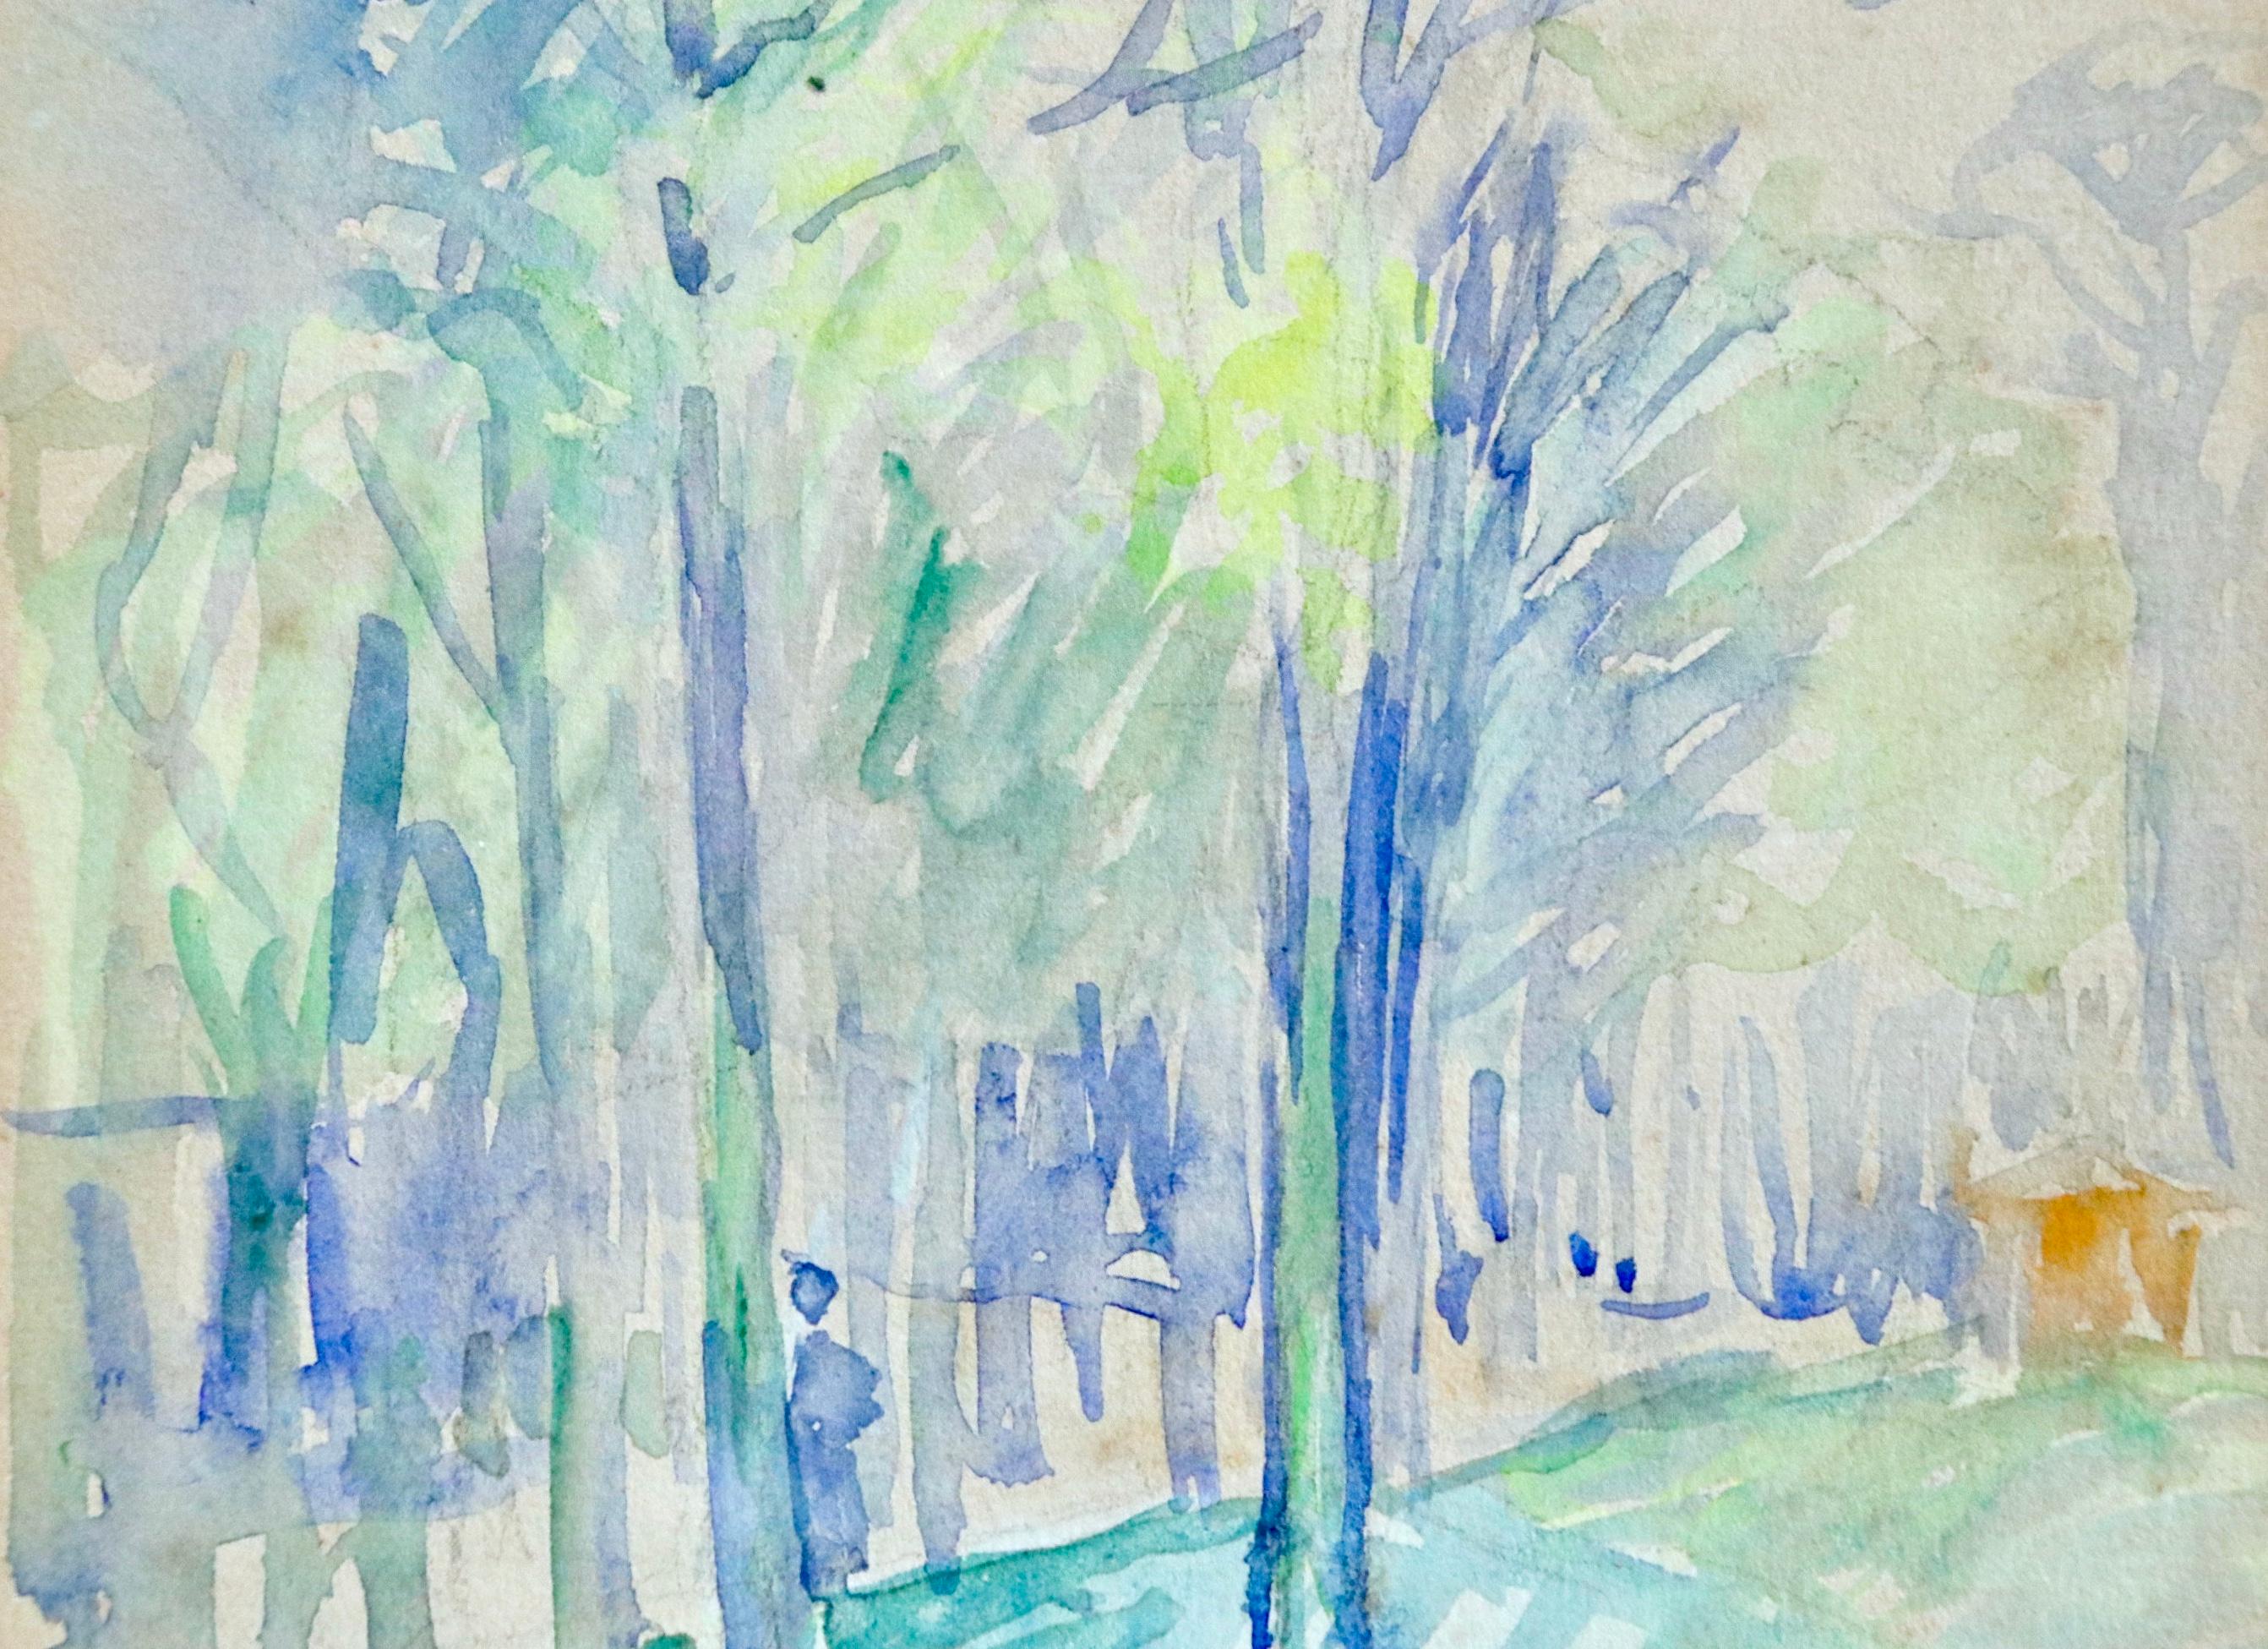 A lovely watercolour on paper circa 1900 by French neo-impressionist painter Henri Edmond Cross. The work depicts a figure in an alley of trees brushed in cool shades of blue and green. 

Signature:
Stamped with the cachet of the artist's sale lower